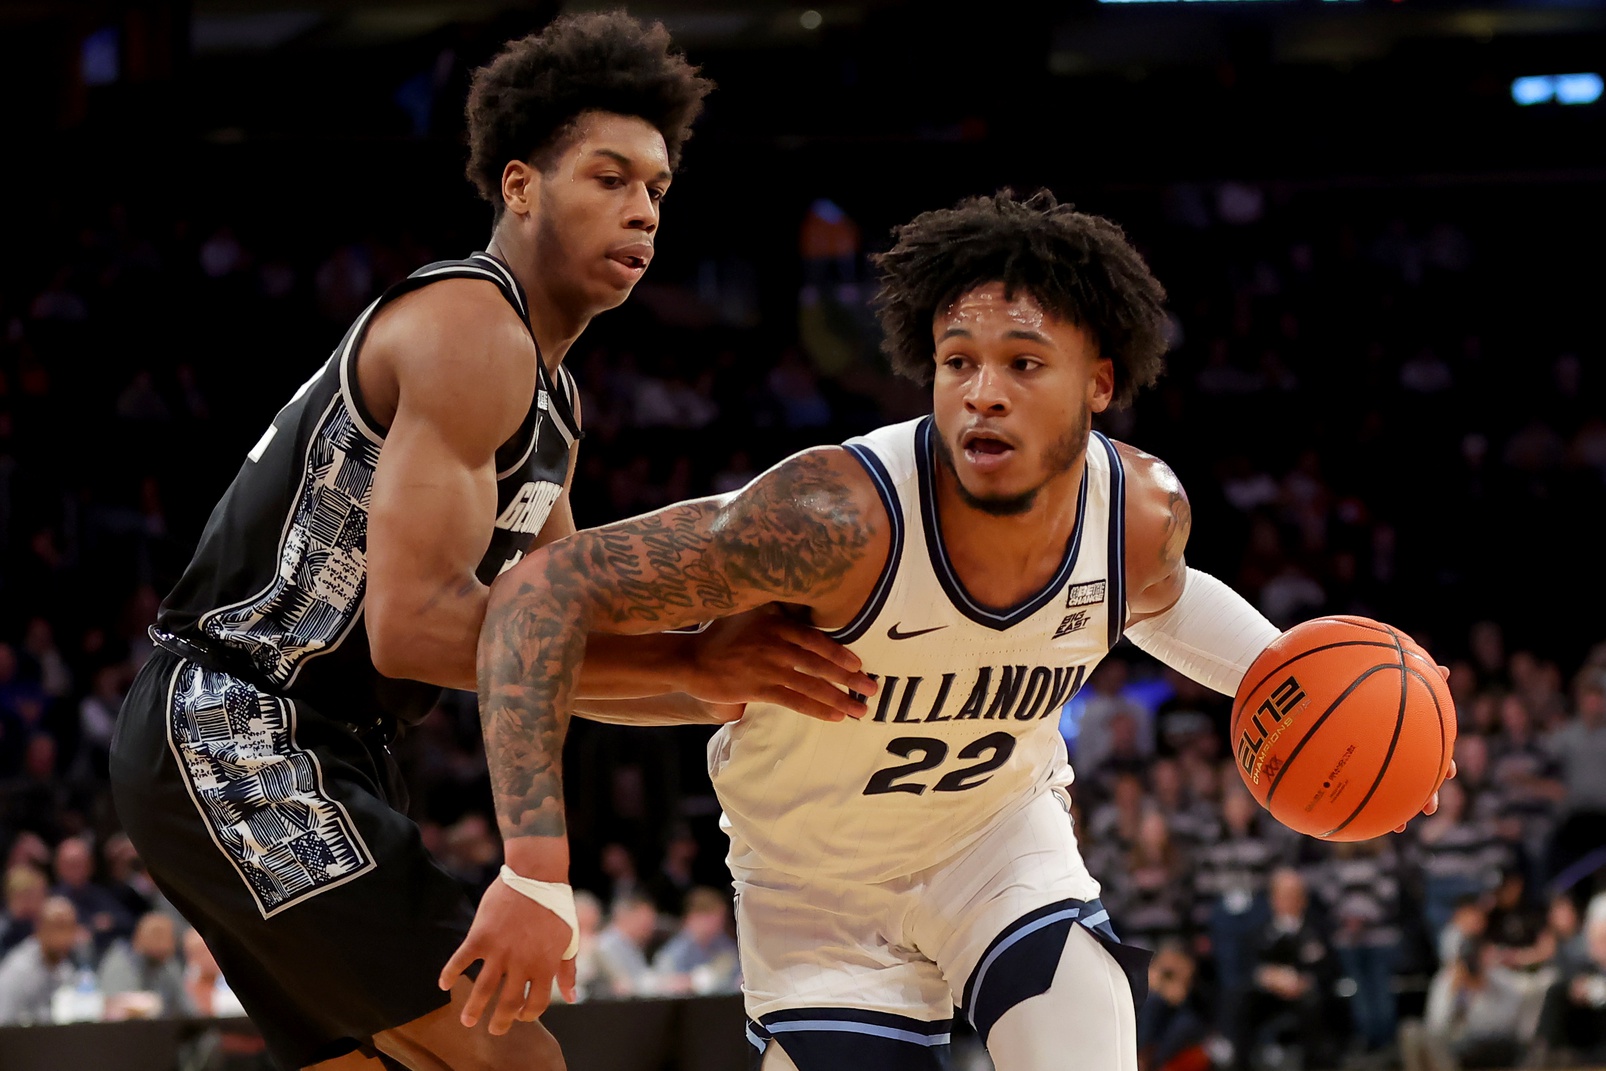 Mar 8, 2023; New York, NY, USA; Villanova Wildcats forward Cam Whitmore (22) drives to the basket against Georgetown Hoyas guard Jordan Riley (12) during the second half at Madison Square Garden. Mandatory Credit: Brad Penner-USA TODAY Sports